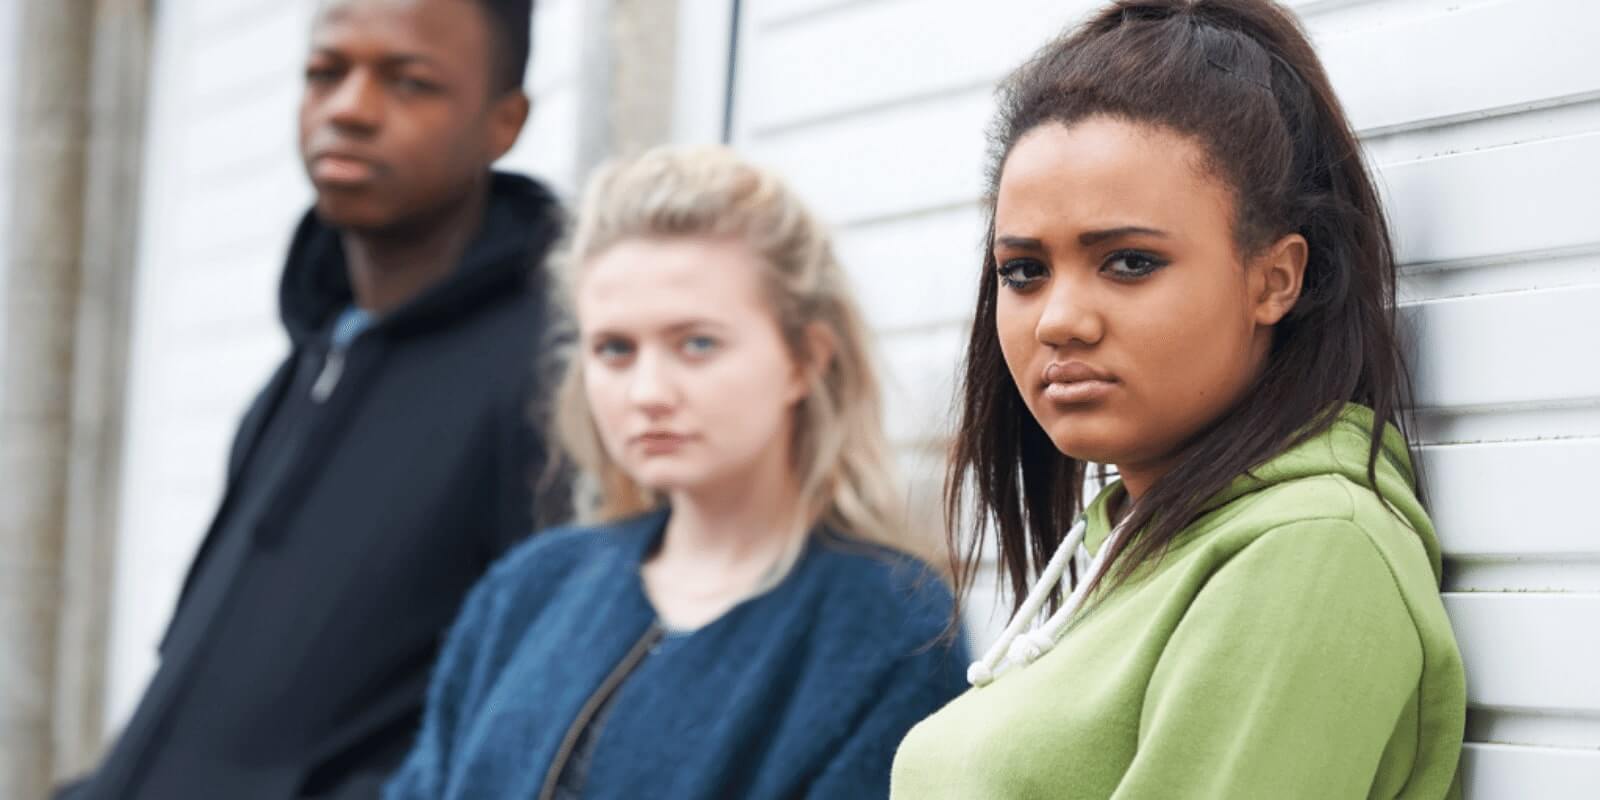 3 teenagers on standing against a white wall looking at the camera